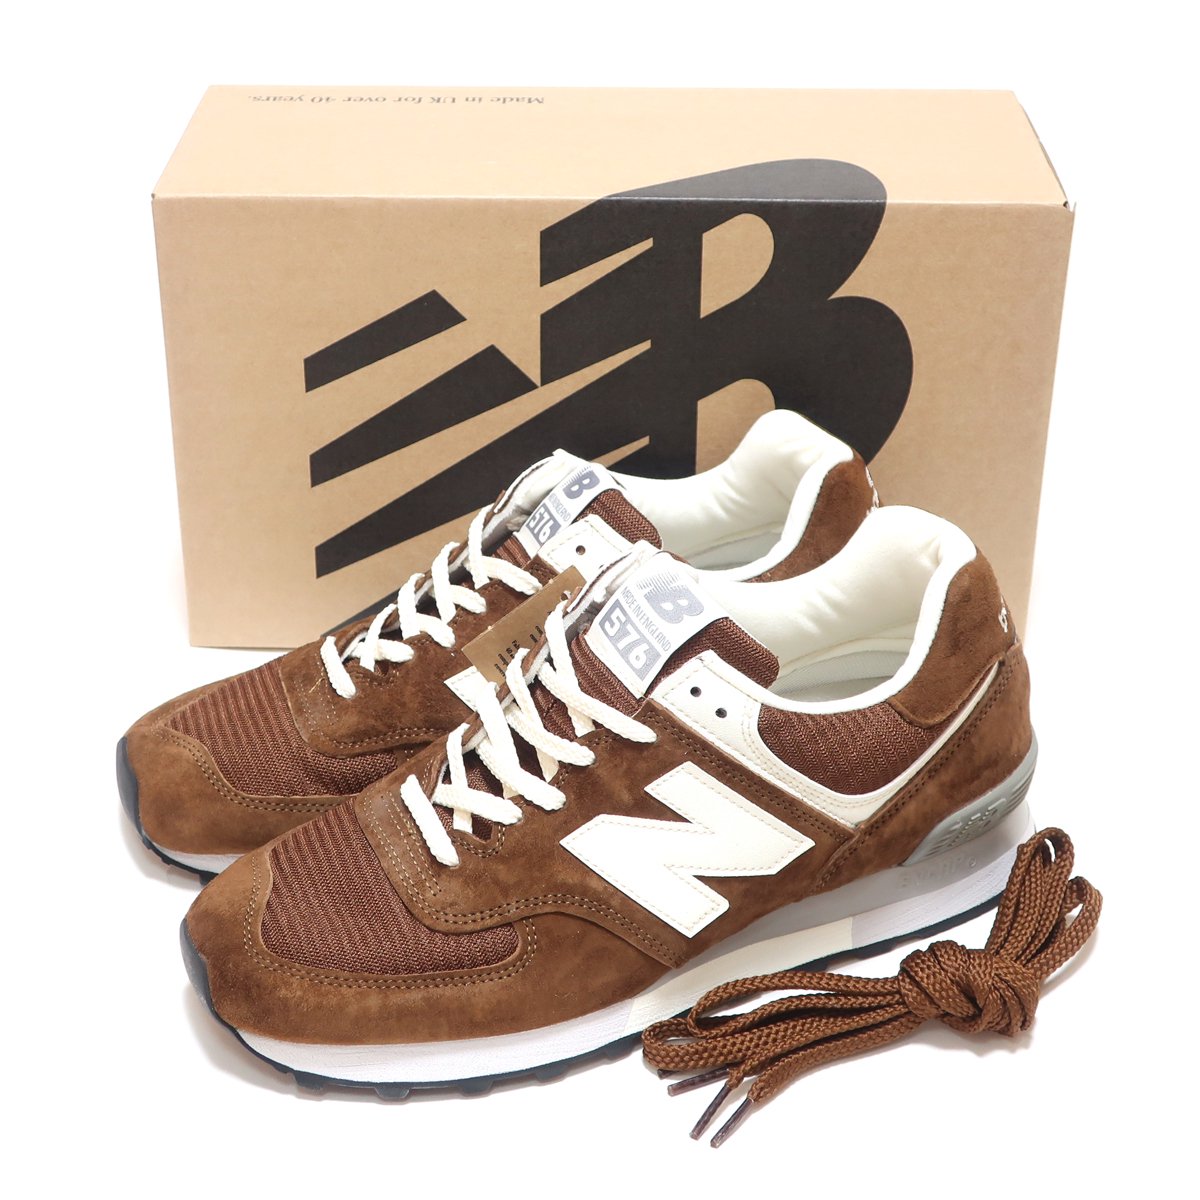 NEW BALANCE OU576BRN BROWN SUEDE MADE IN UK M576 ENGLAND 